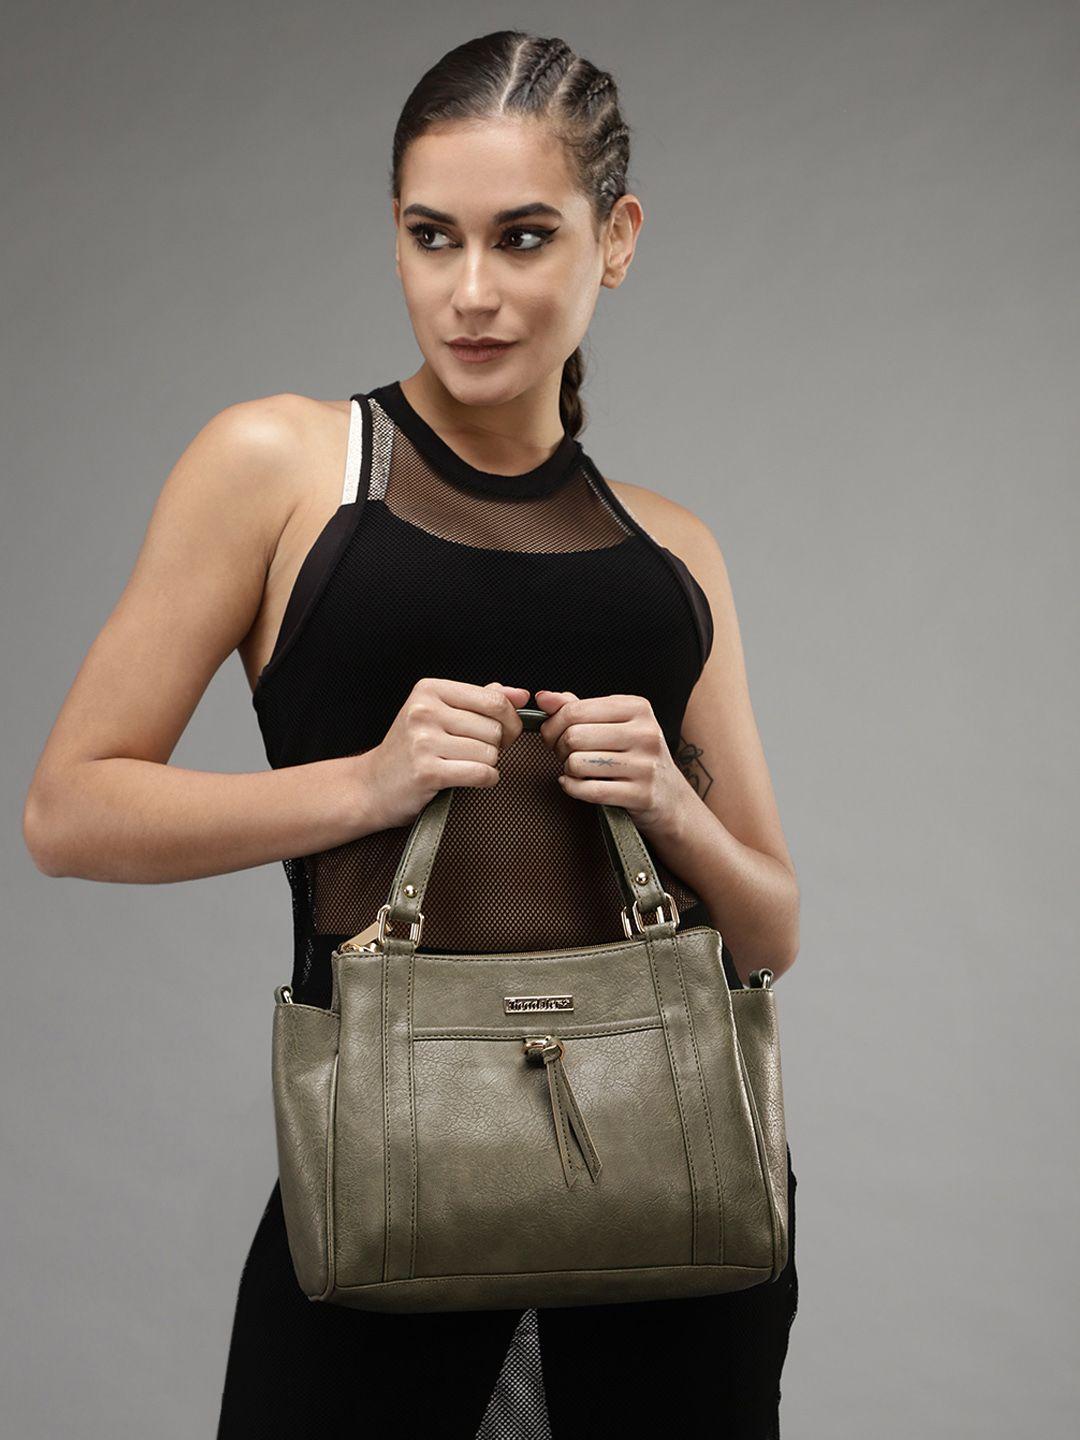 roadster women olive green textured swagger handheld bag